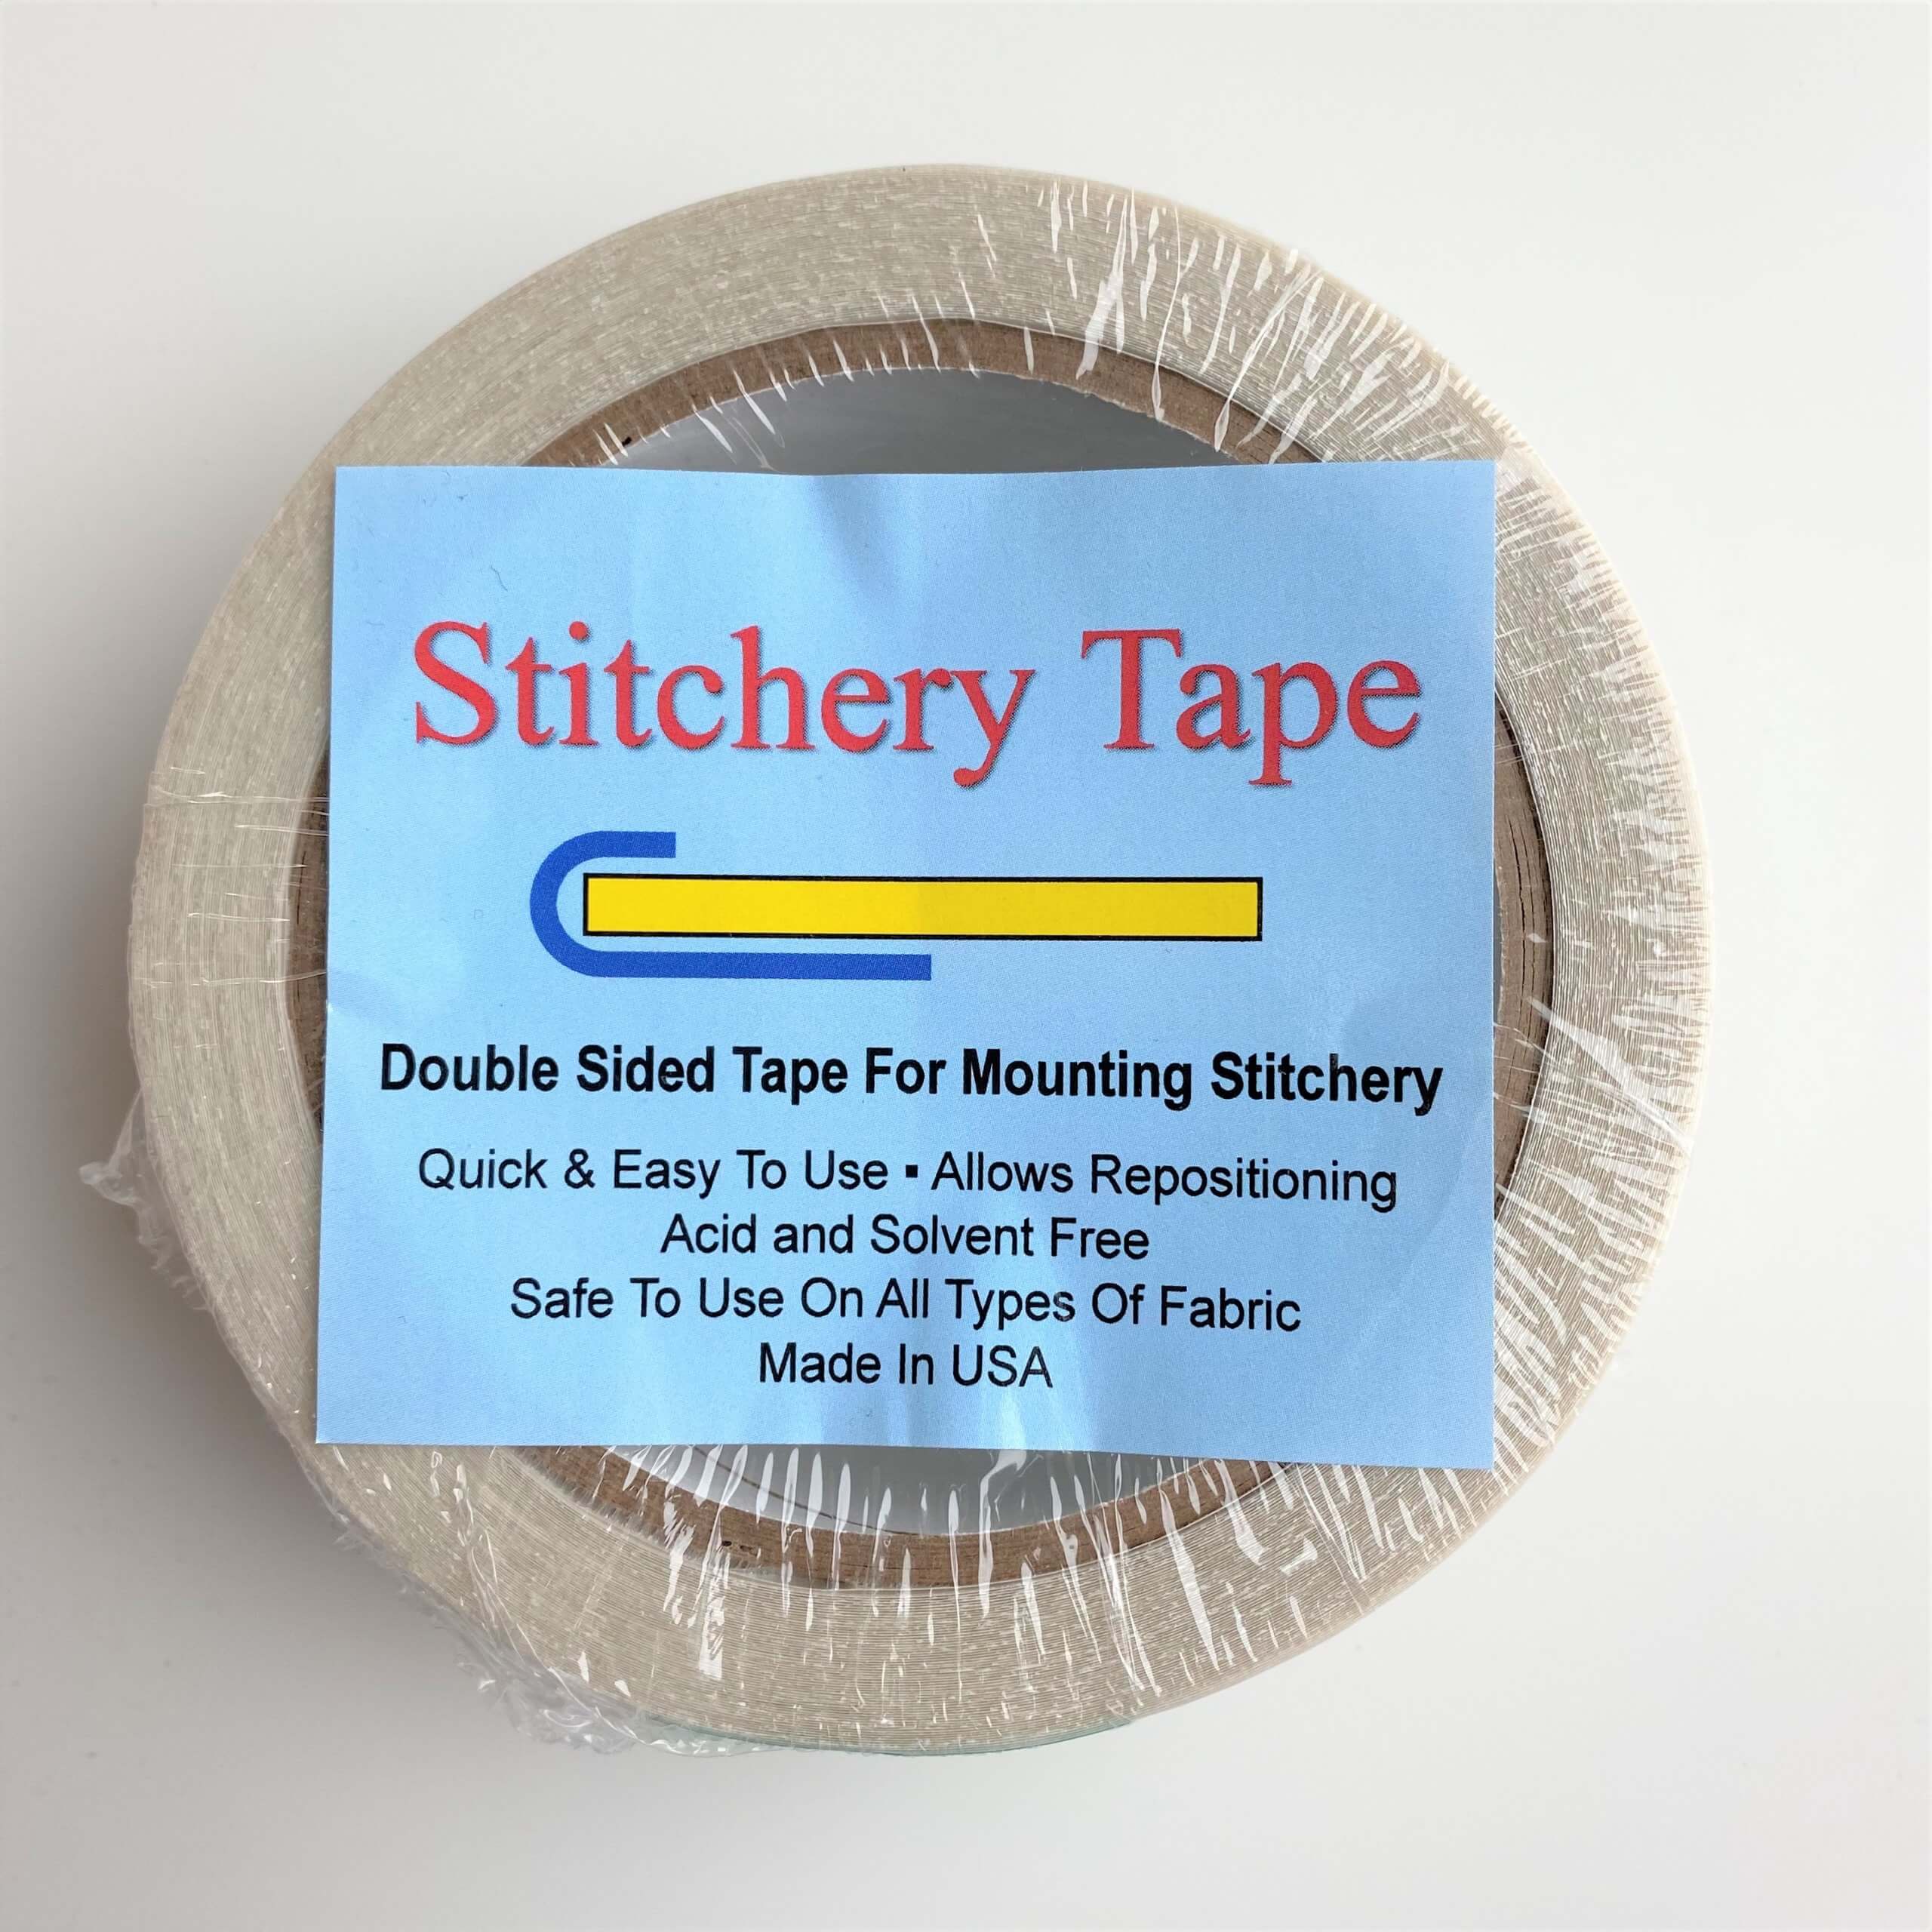 Stitchery Tape for finishing many of your cross stitch projects!